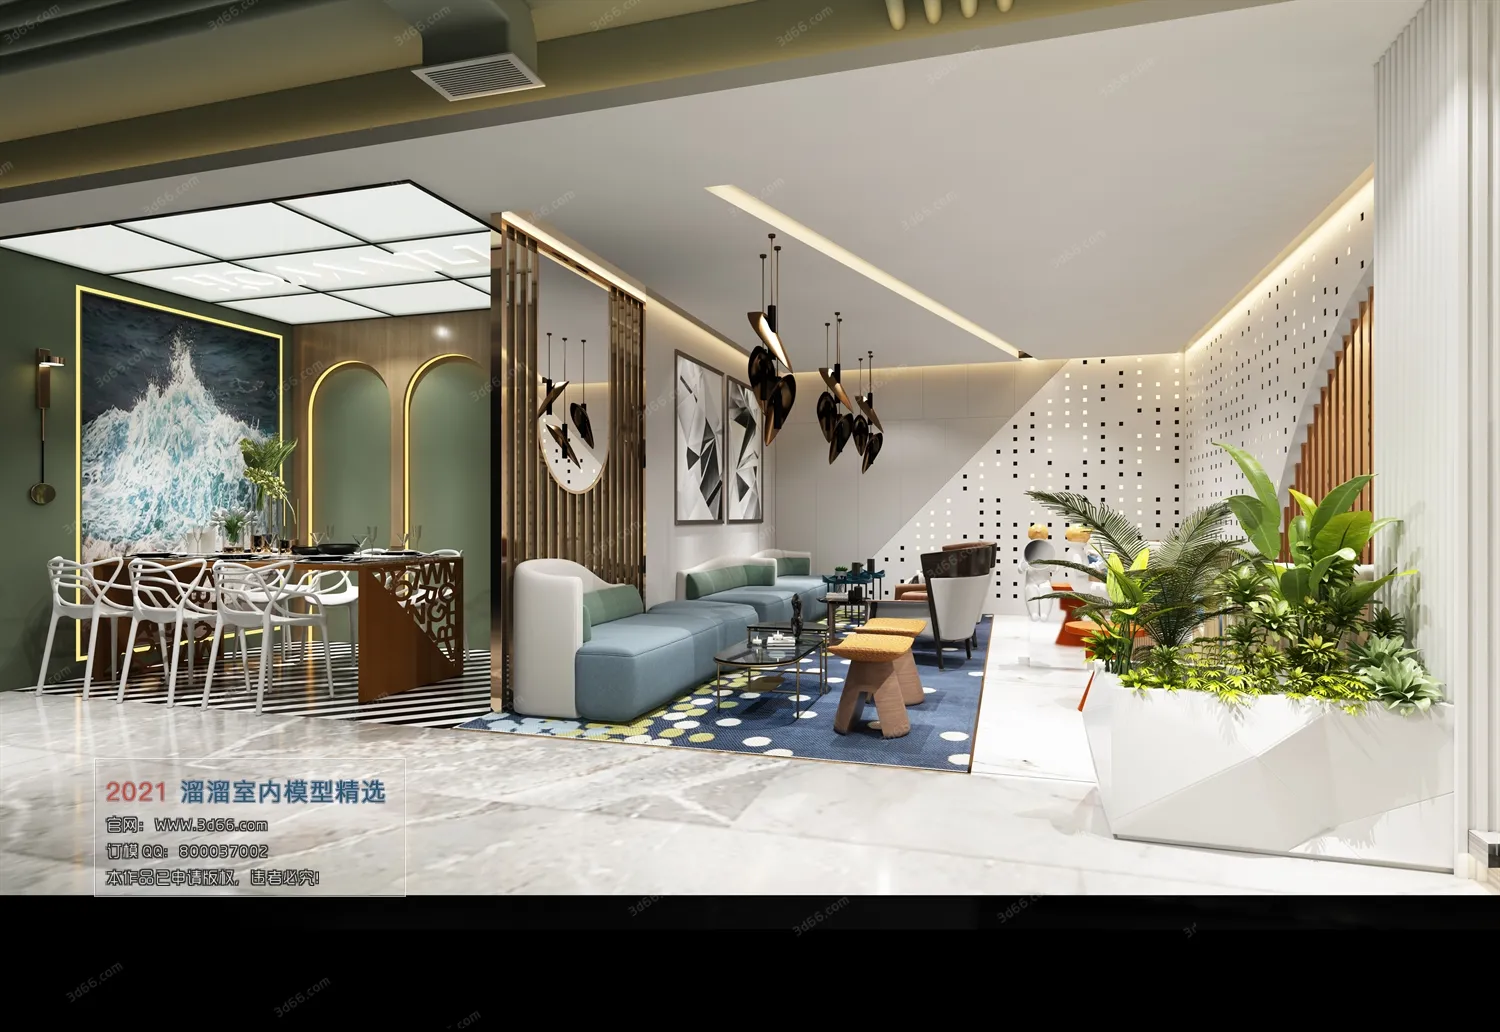 HOTEL, TEAHOUSE, CAFE – A001-Modern style-Vray model